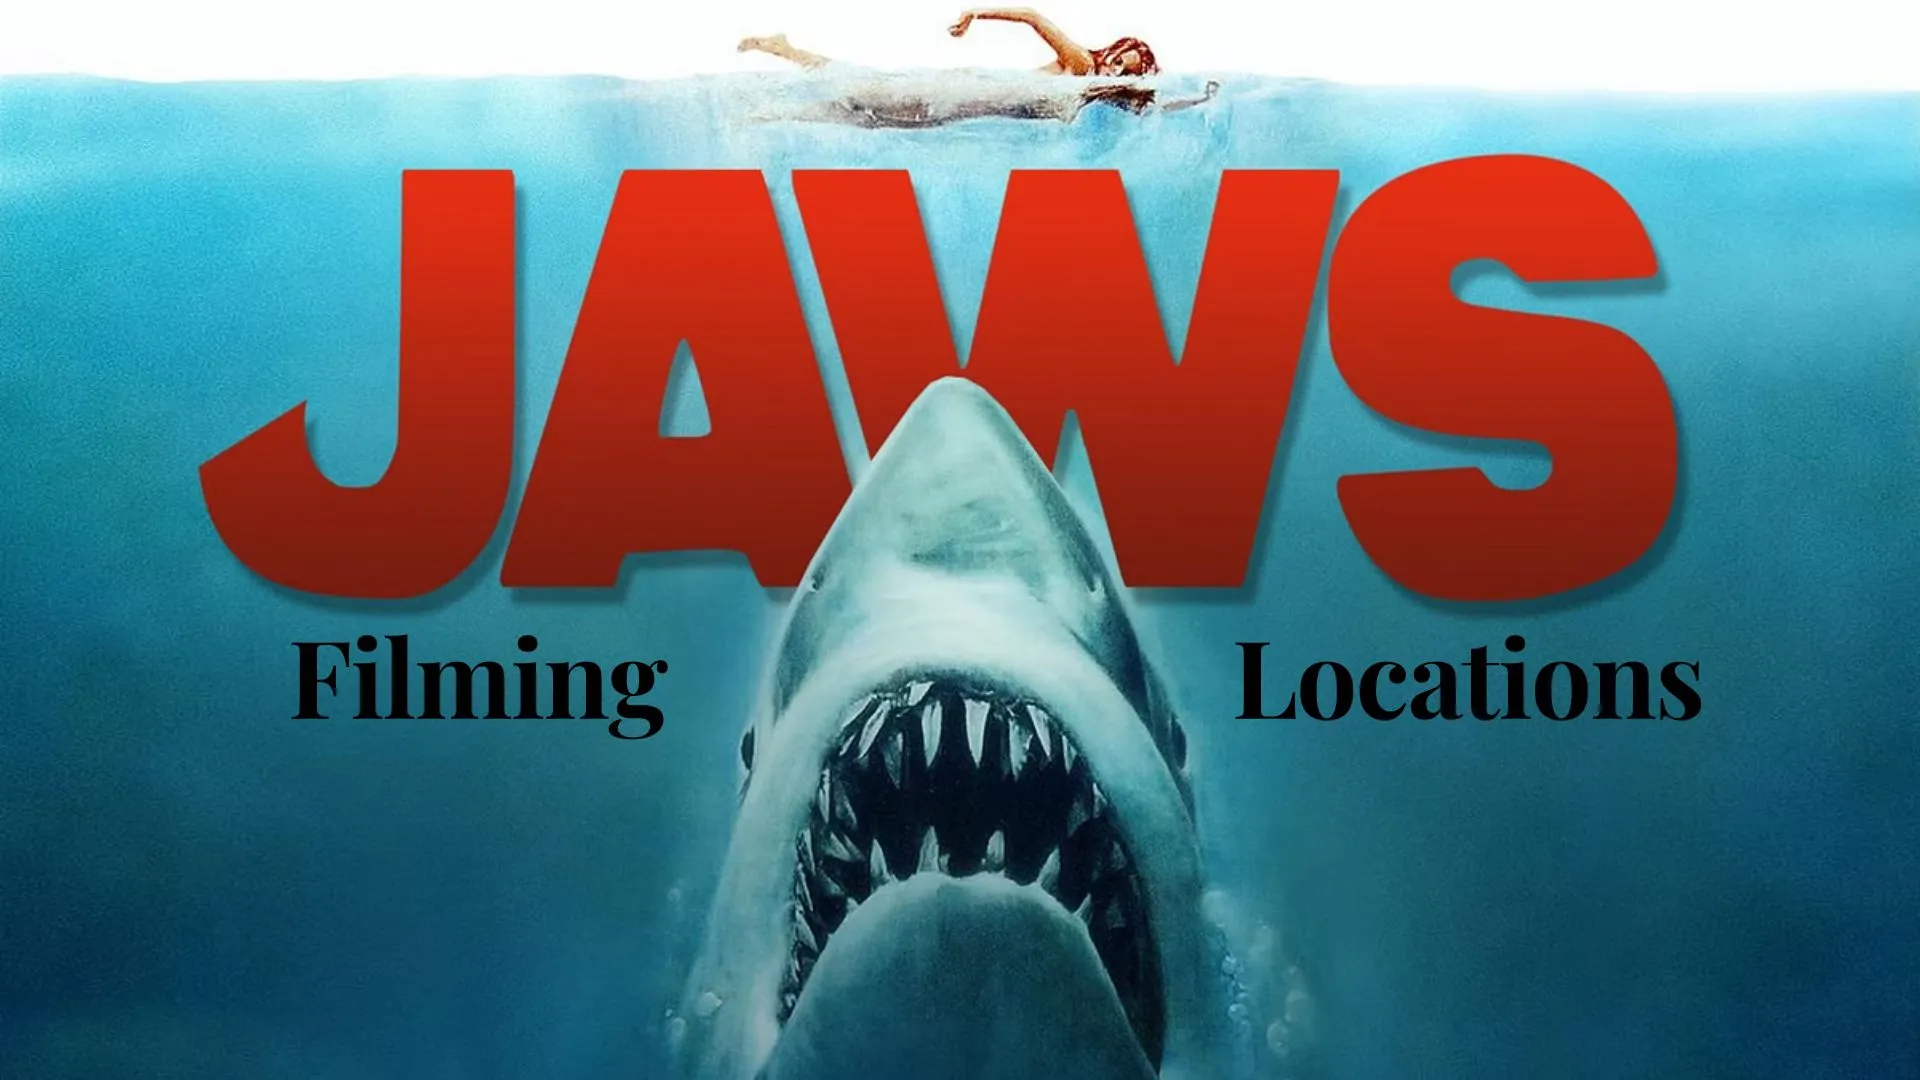 Jaws Filming Locations